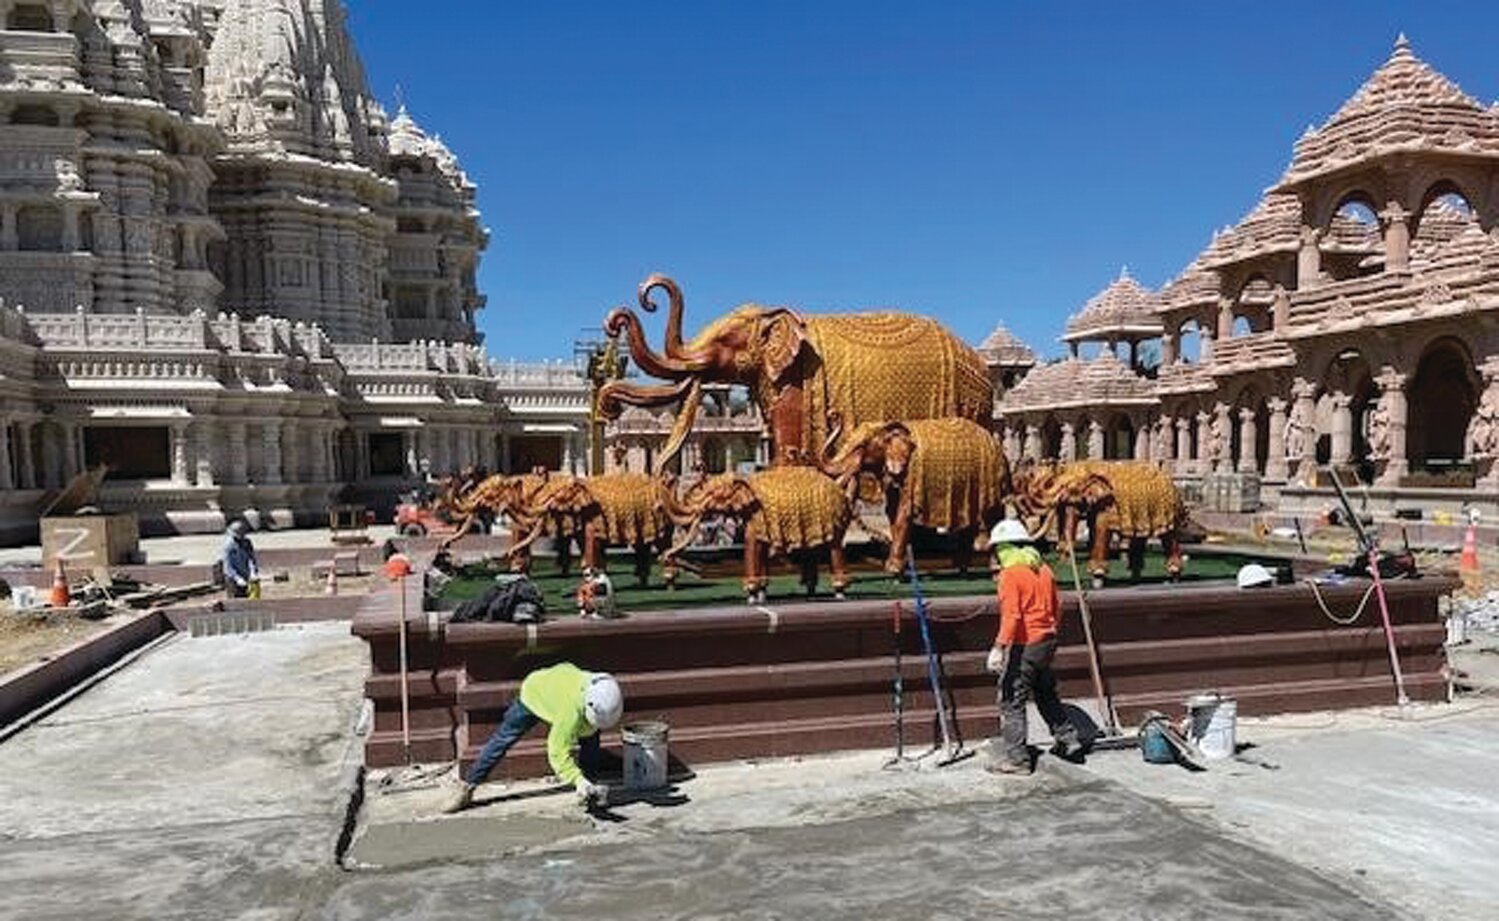 Construction work goes on near elephant statues. Hindus value the animals for their loyalty and kindness.